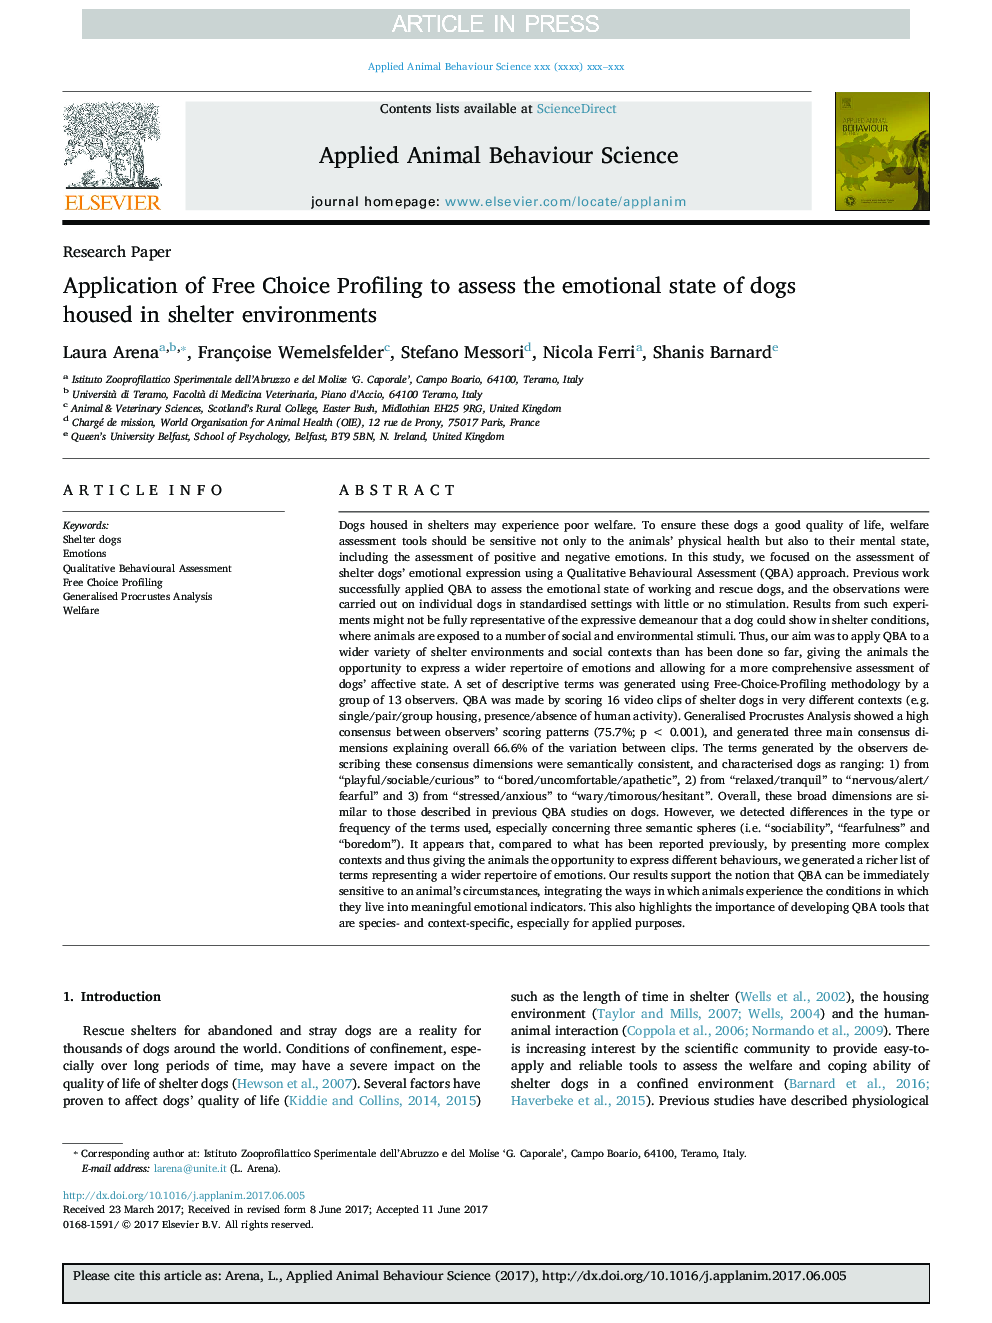 Application of Free Choice Profiling to assess the emotional state of dogs housed in shelter environments